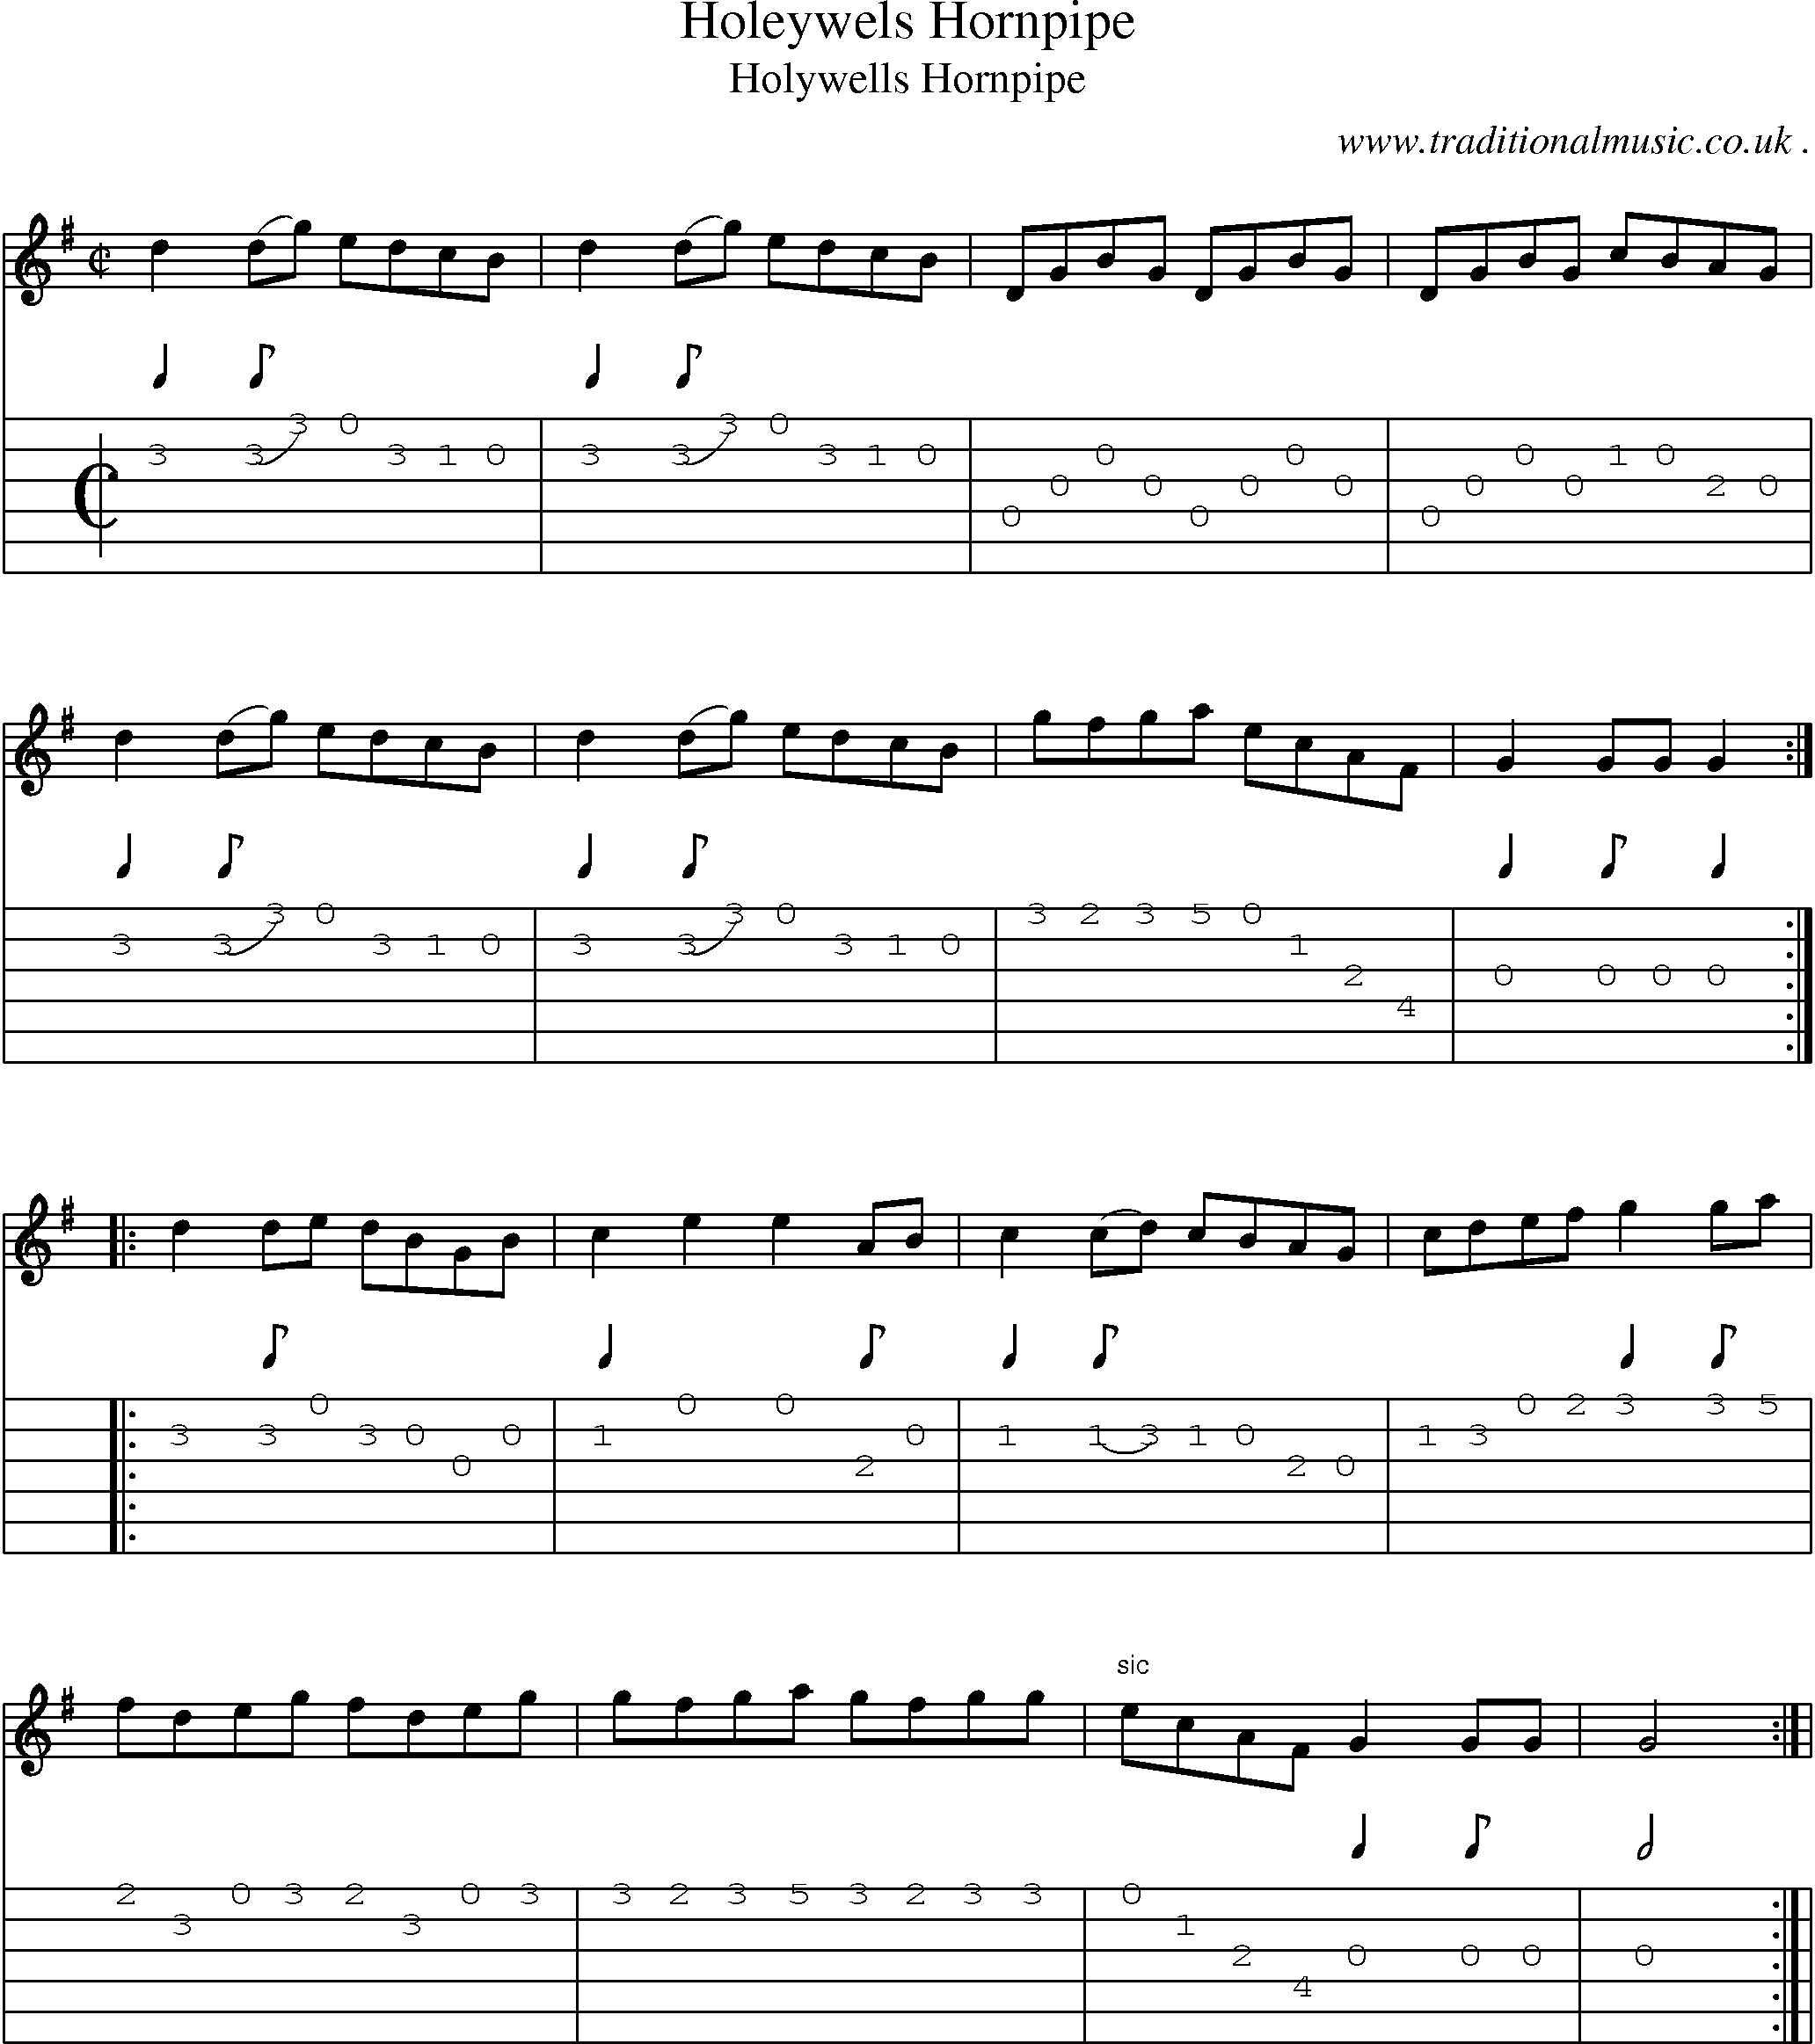 Sheet-Music and Guitar Tabs for Holeywels Hornpipe